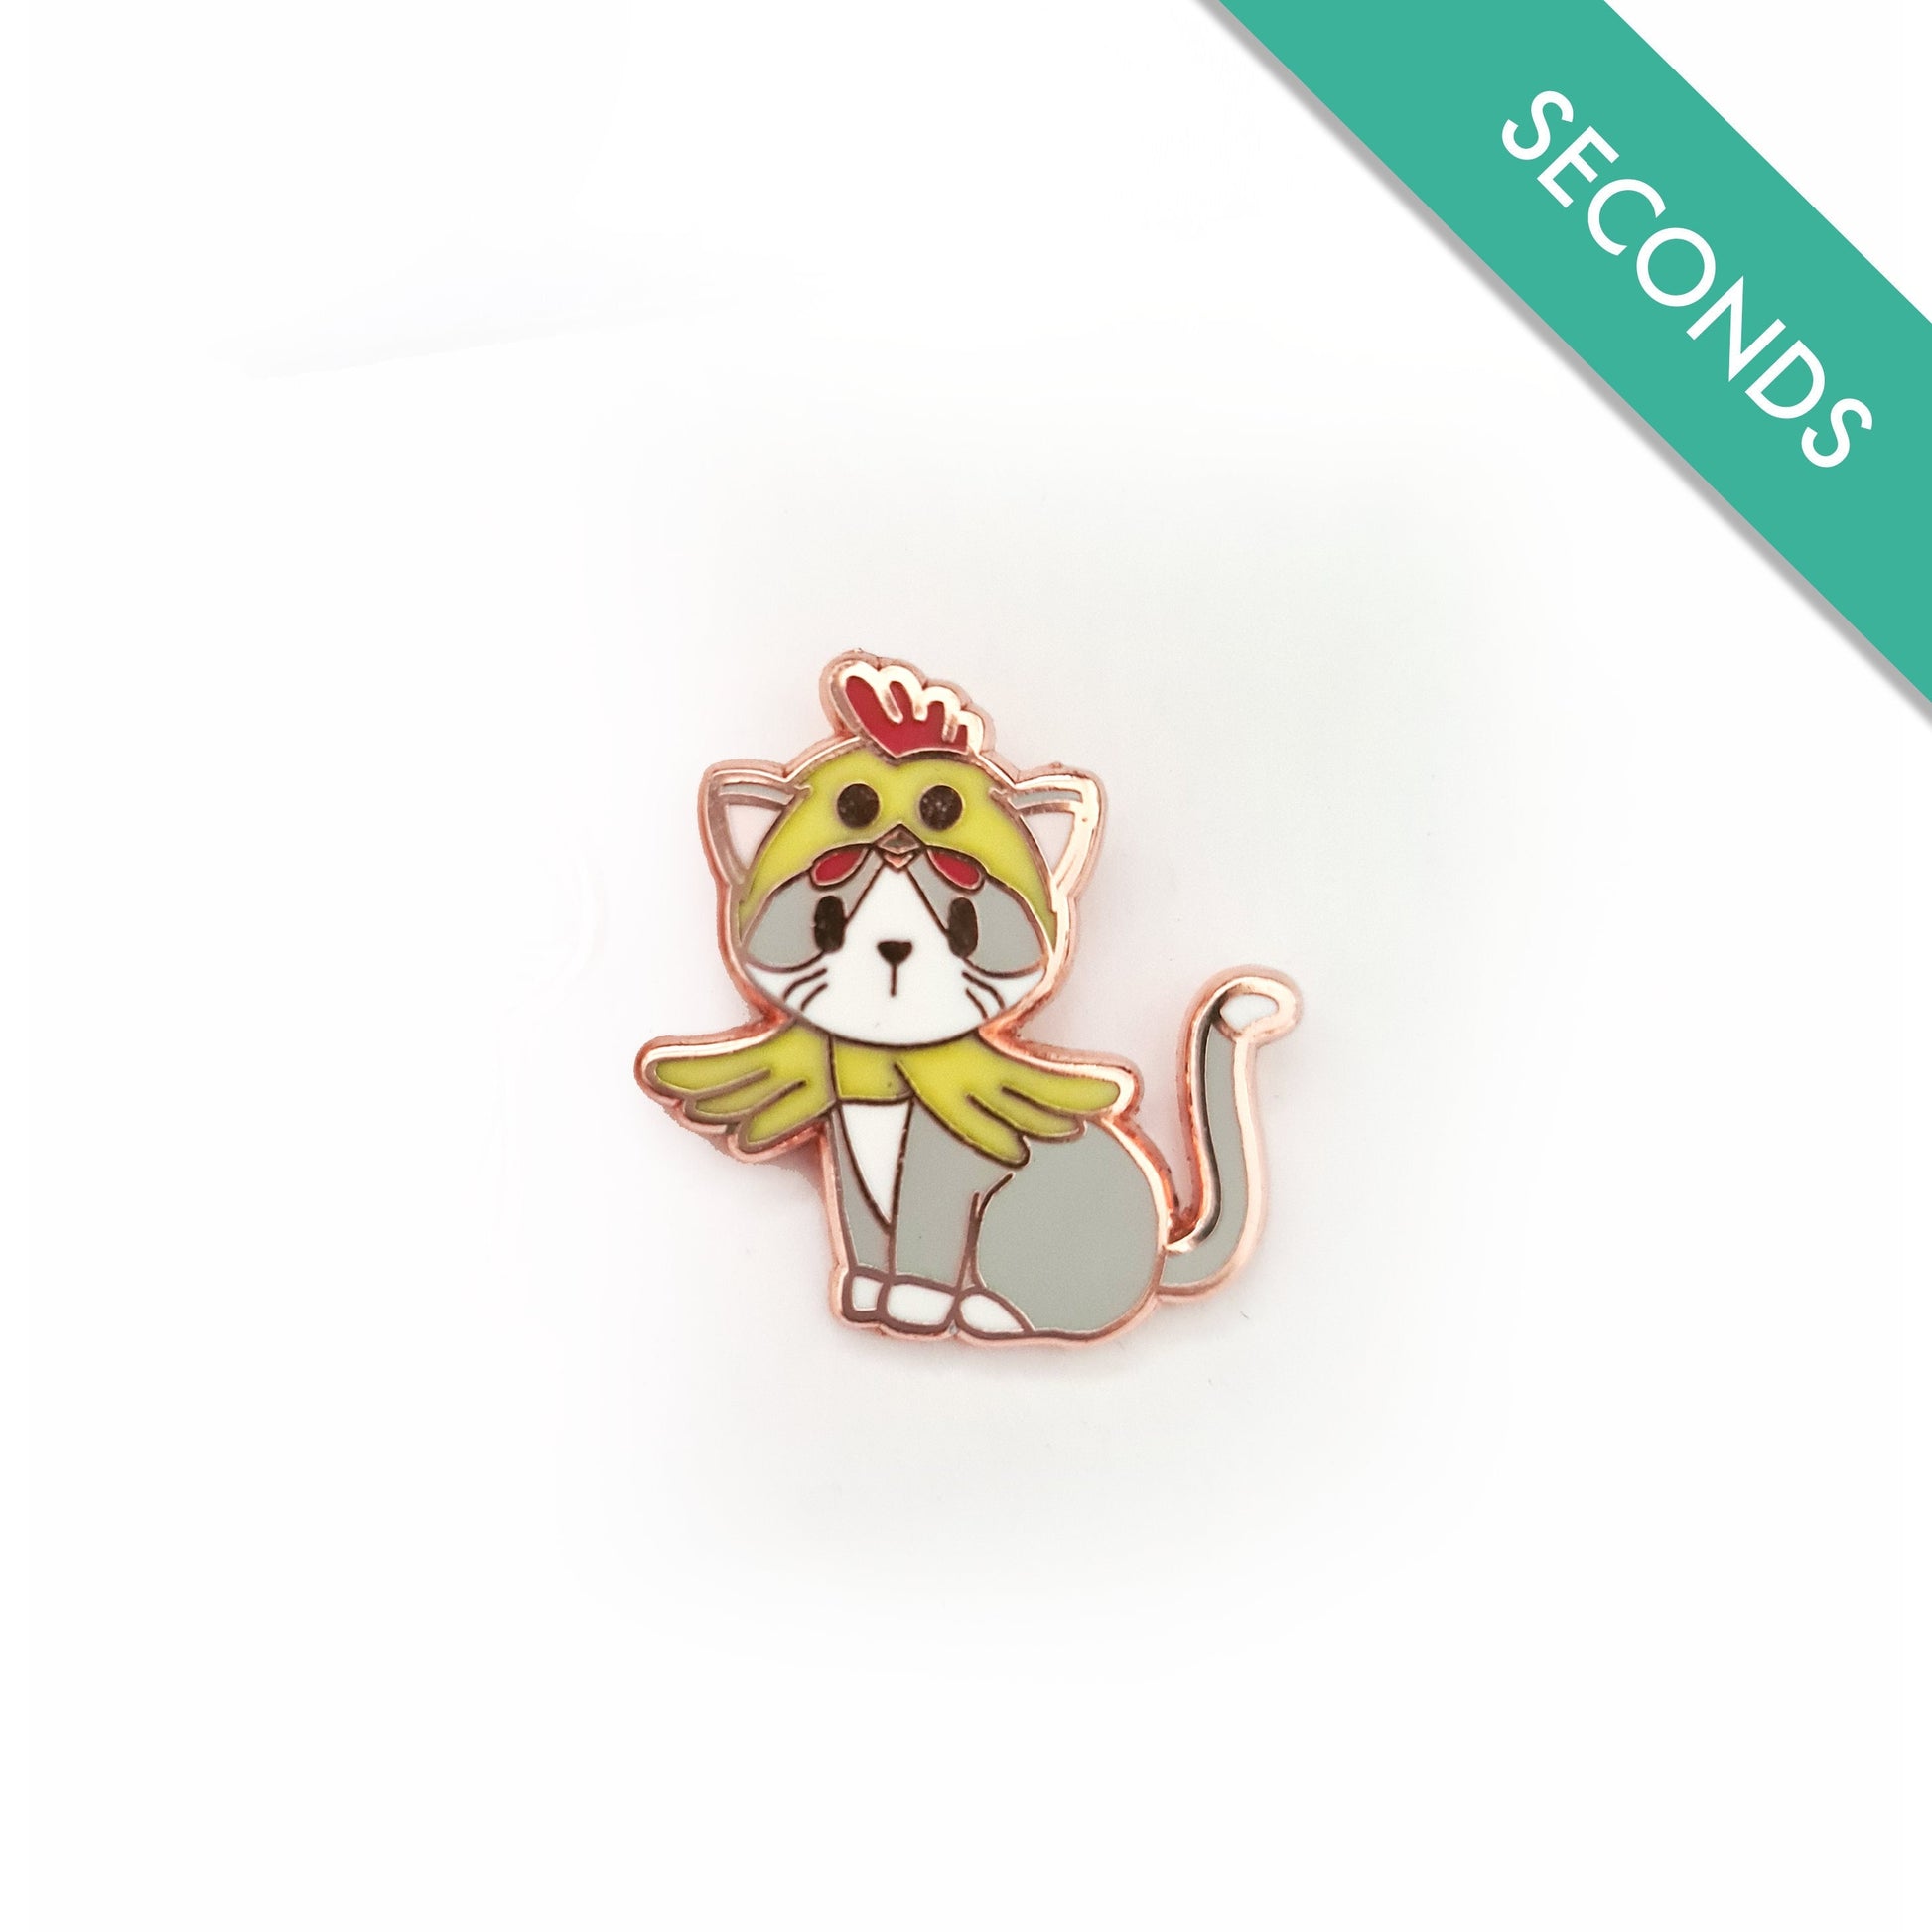 Kitty in Chicken Costume - Pin Seconds - Small Enamel Pin